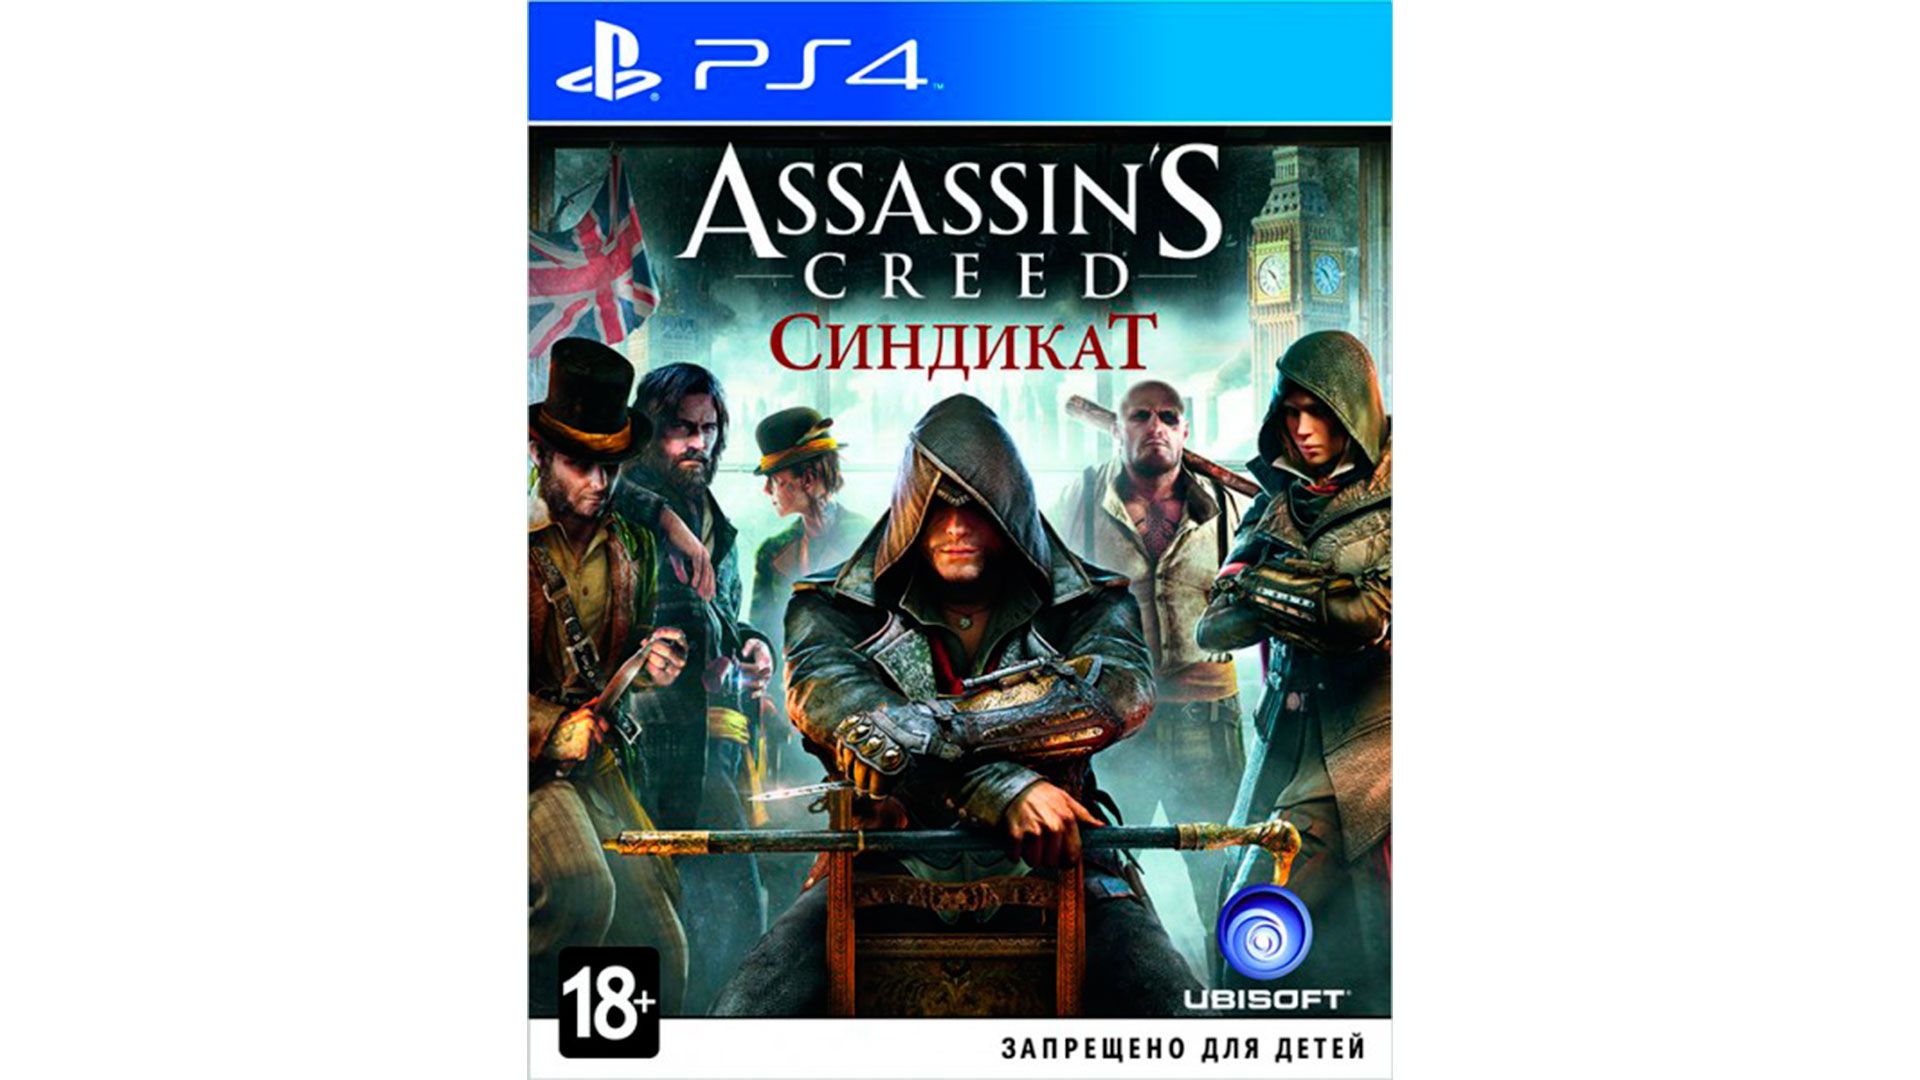 Creed игра ps4. Ассасин Крид Синдикат диск ПС 4. Assassin's Creed Syndicate ps4. Ассасин Синдикат пс4. Assassin's Creed Синдикат ps4 диск.